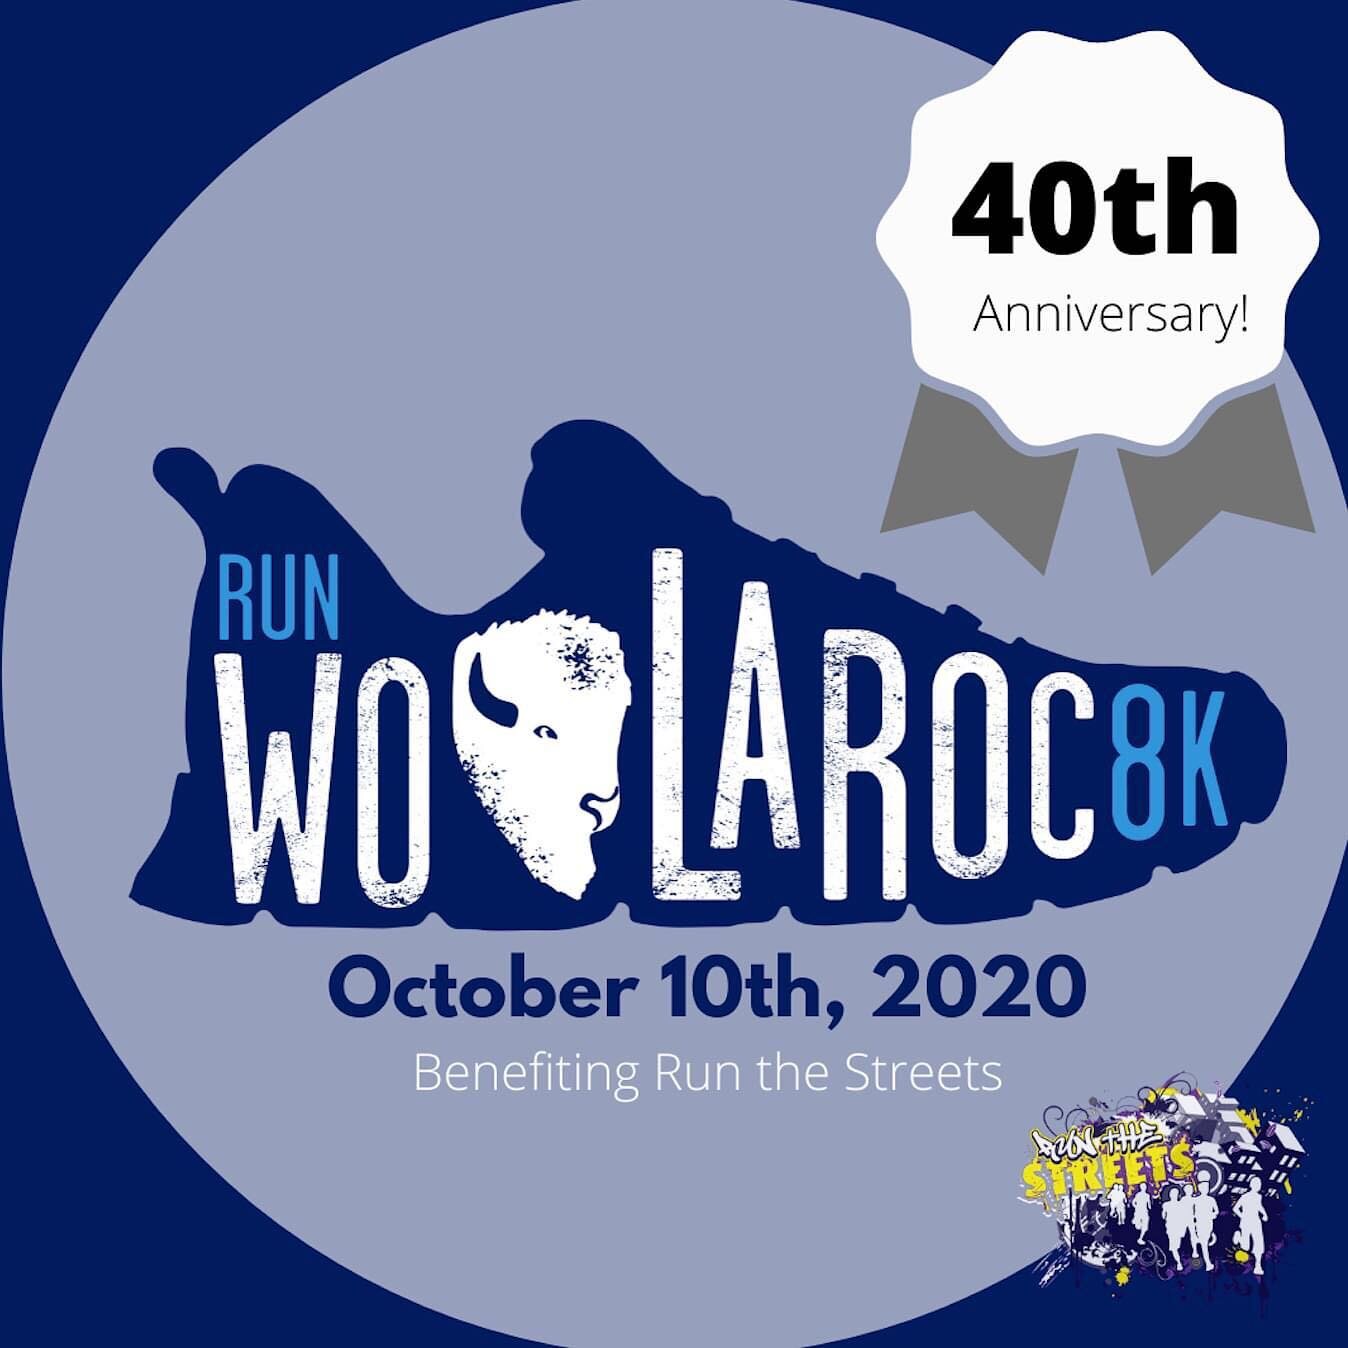 We are kicking off the weekend with an awesome ANNOUNCEMENT... We are rebranding and can&rsquo;t wait for you to join us at the 40th annual Woolaroc 8k!! @woolaroc Sign ups are now open! 
www.runsignup.com/Race/OK/Bartlesville/Woolaroc8k 
#rts #rtsis